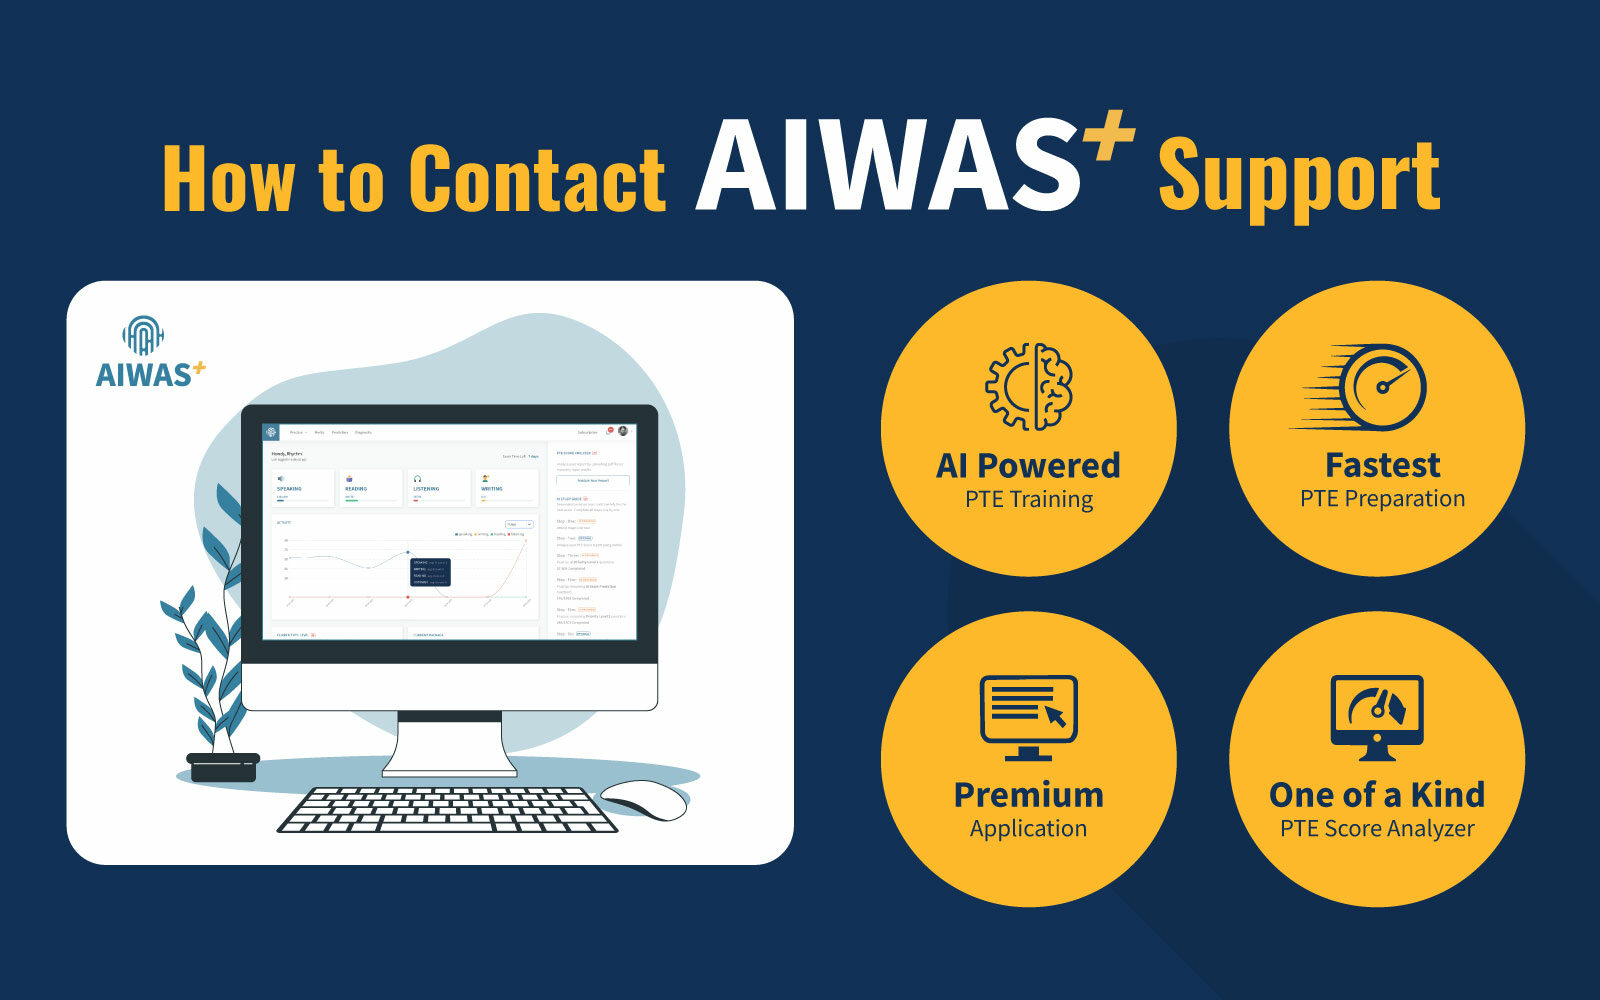 How to Contact AIWAS Plus Support? image